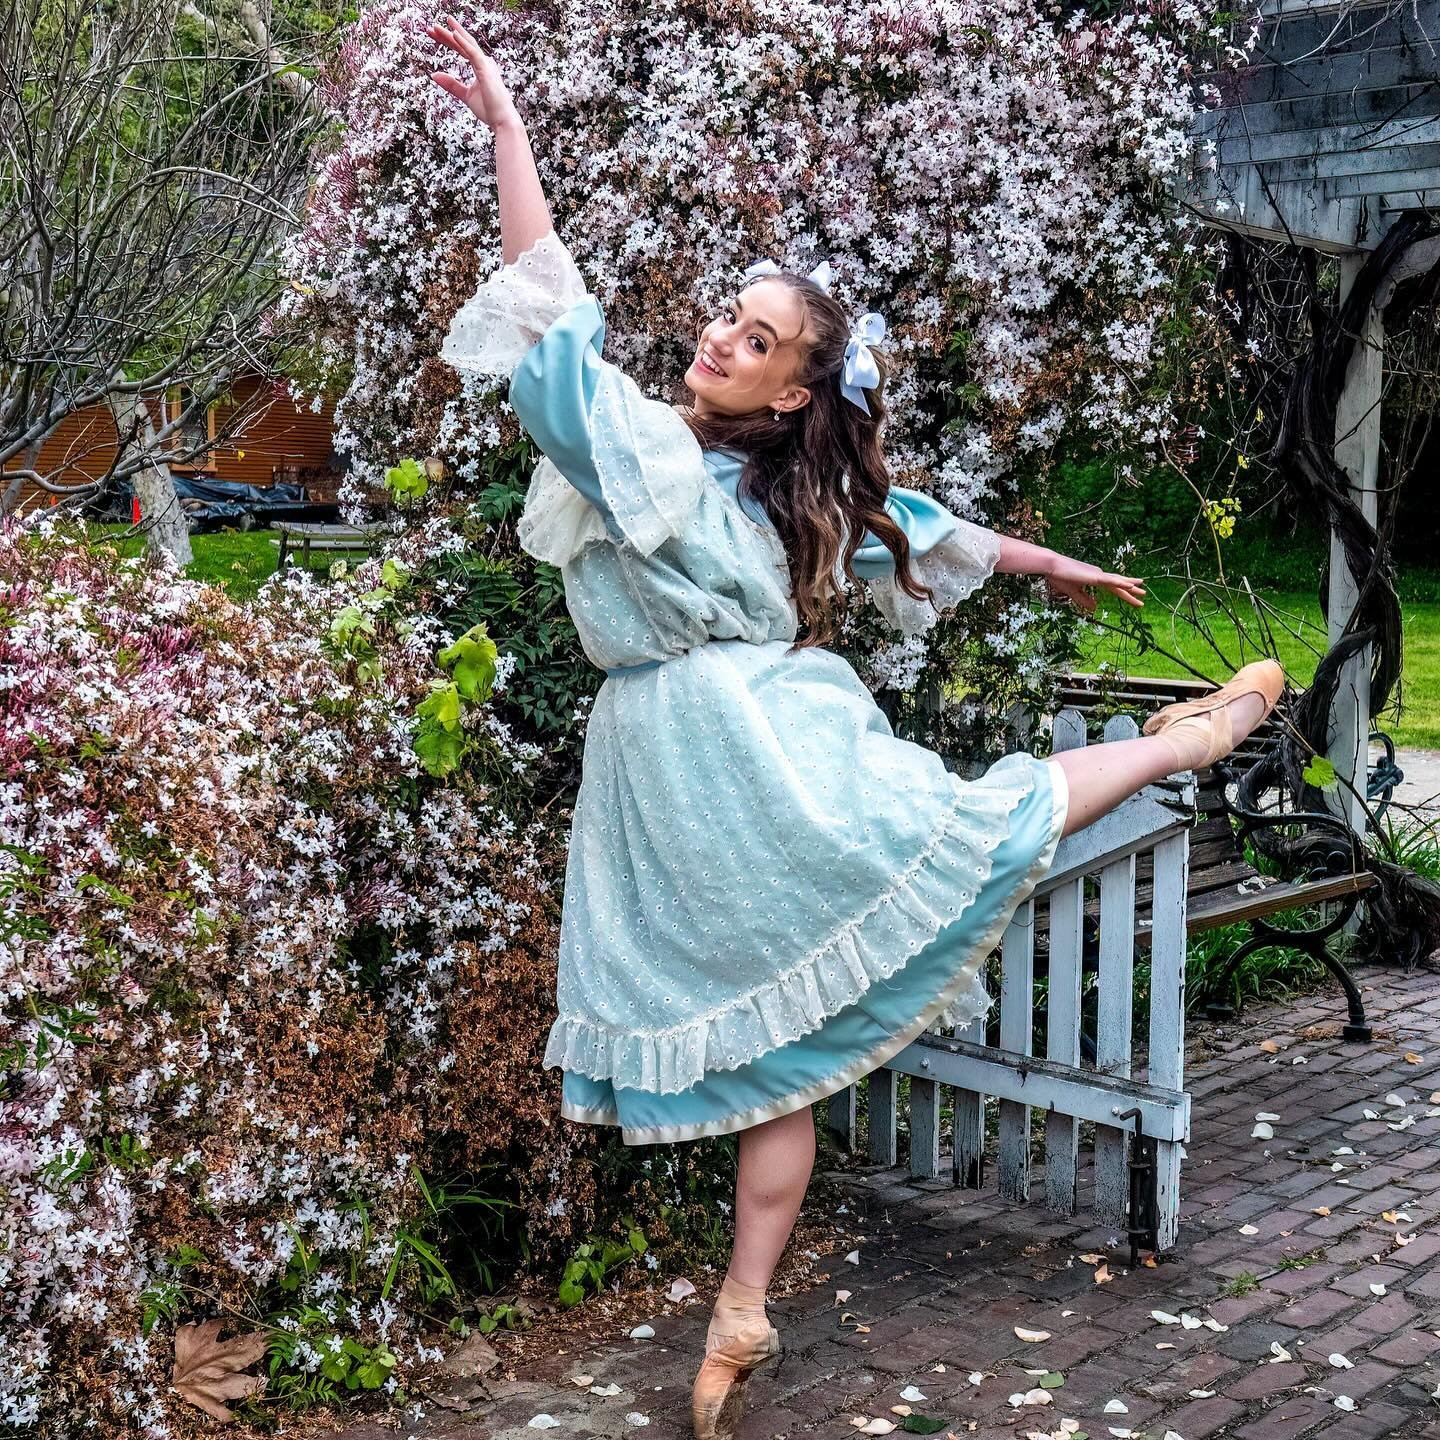 Introducing our new AMY MARCH&rsquo;s for our Spring Immersive Experience! They will be dancing alongside our current cast member, @emilyvancitters! Help us give them a warm welcome! 🌸👩&zwj;👩&zwj;👧&zwj;👧🩰

Picture 1: @emilyvancitters 📸 @edie_t